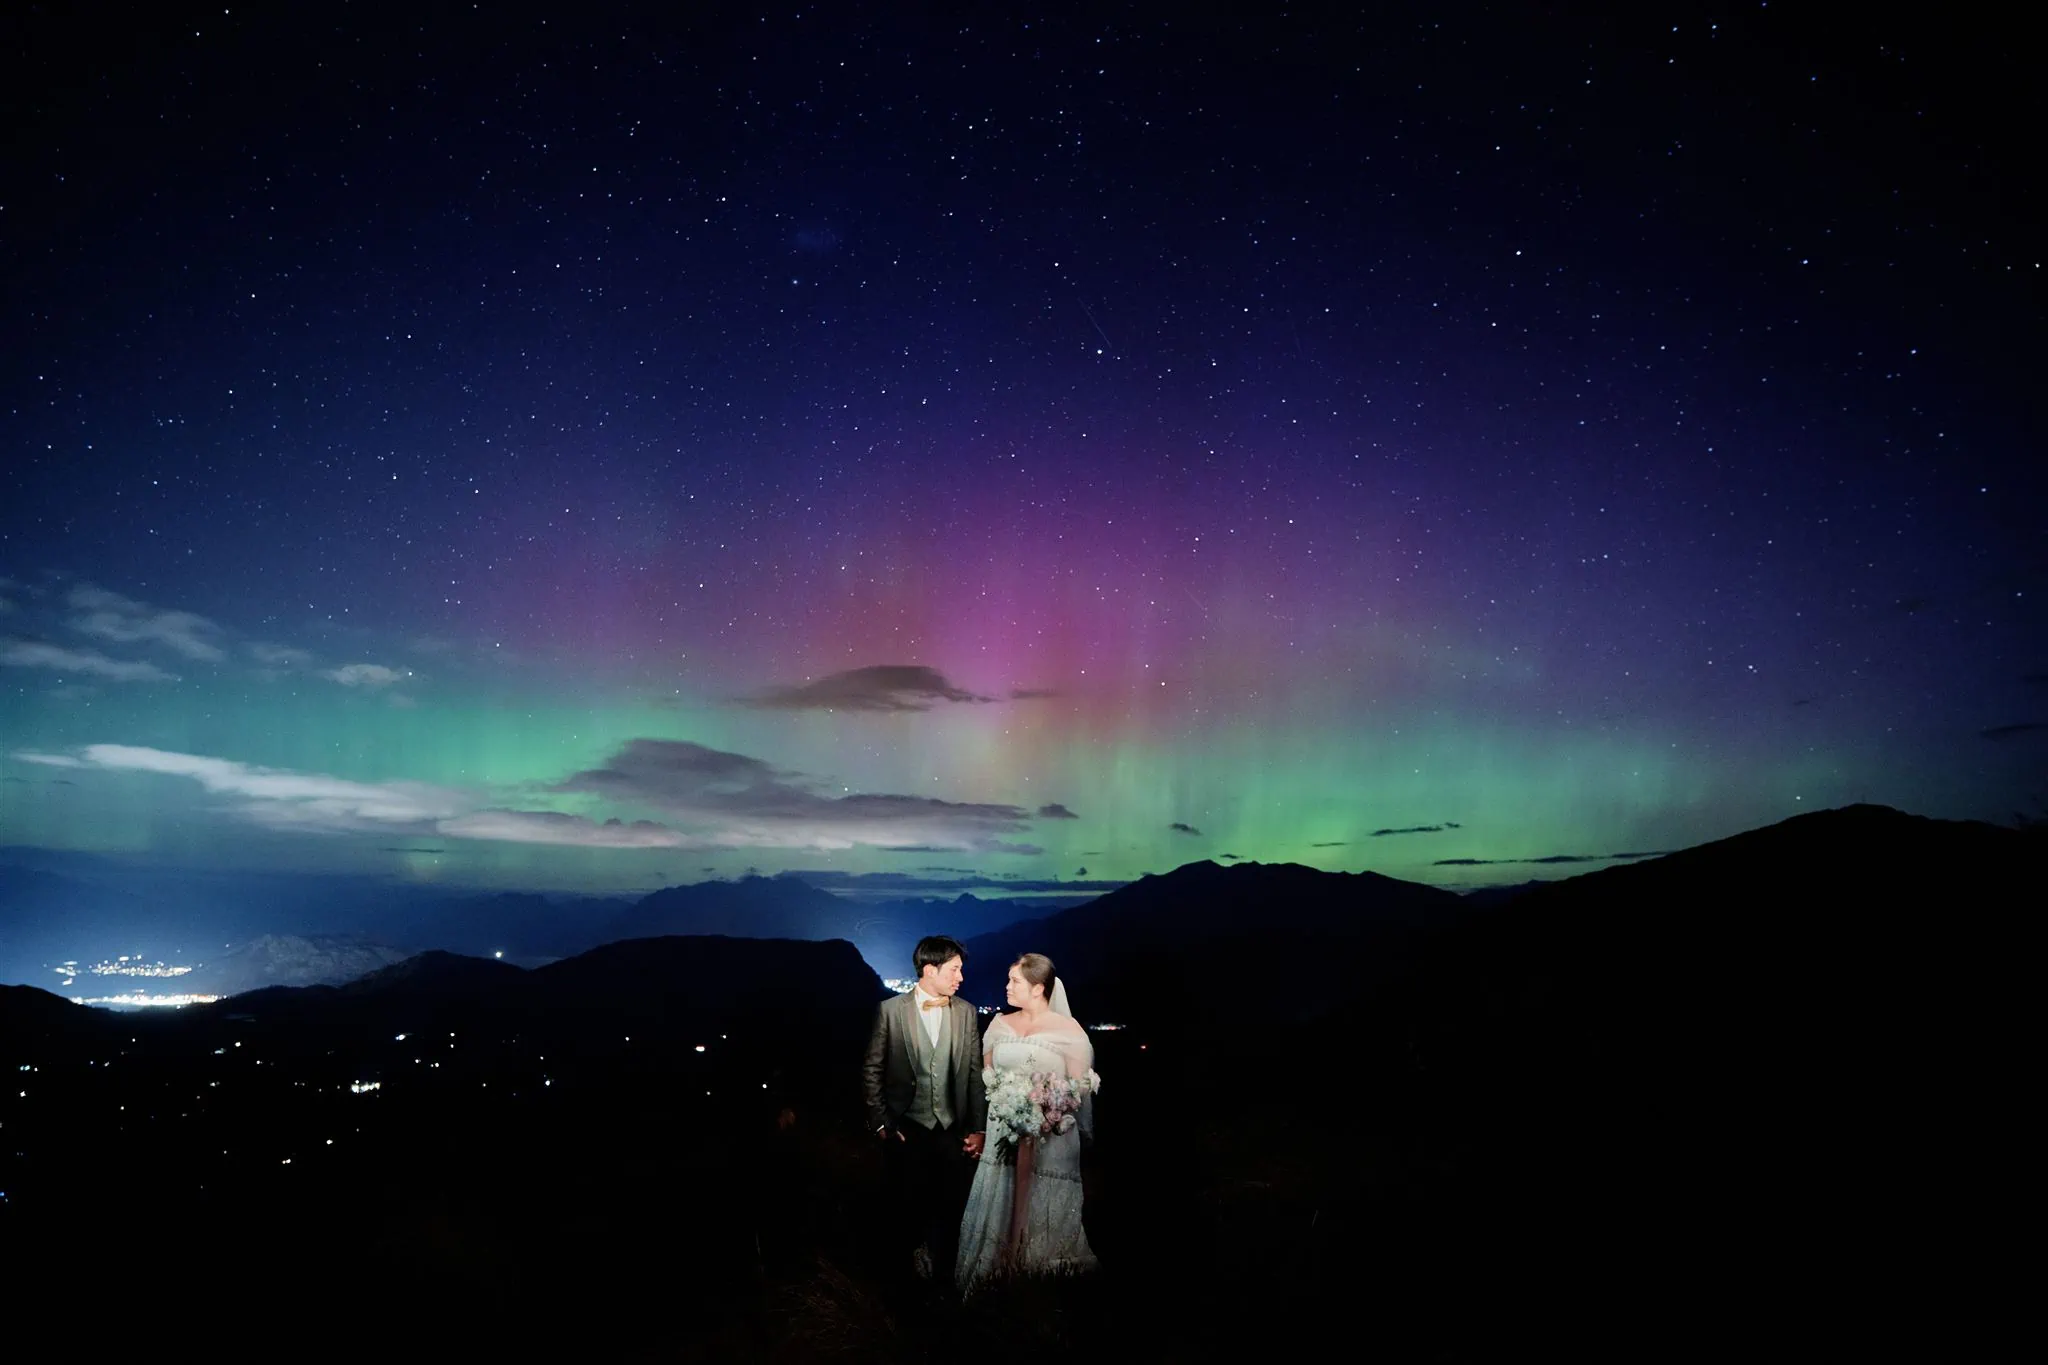 Queenstown New Zealand Elopement Wedding Photographer - A bride and groom standing under the mesmerizing aurora bore, captured in a breathtaking starry night shoot for our portfolio.